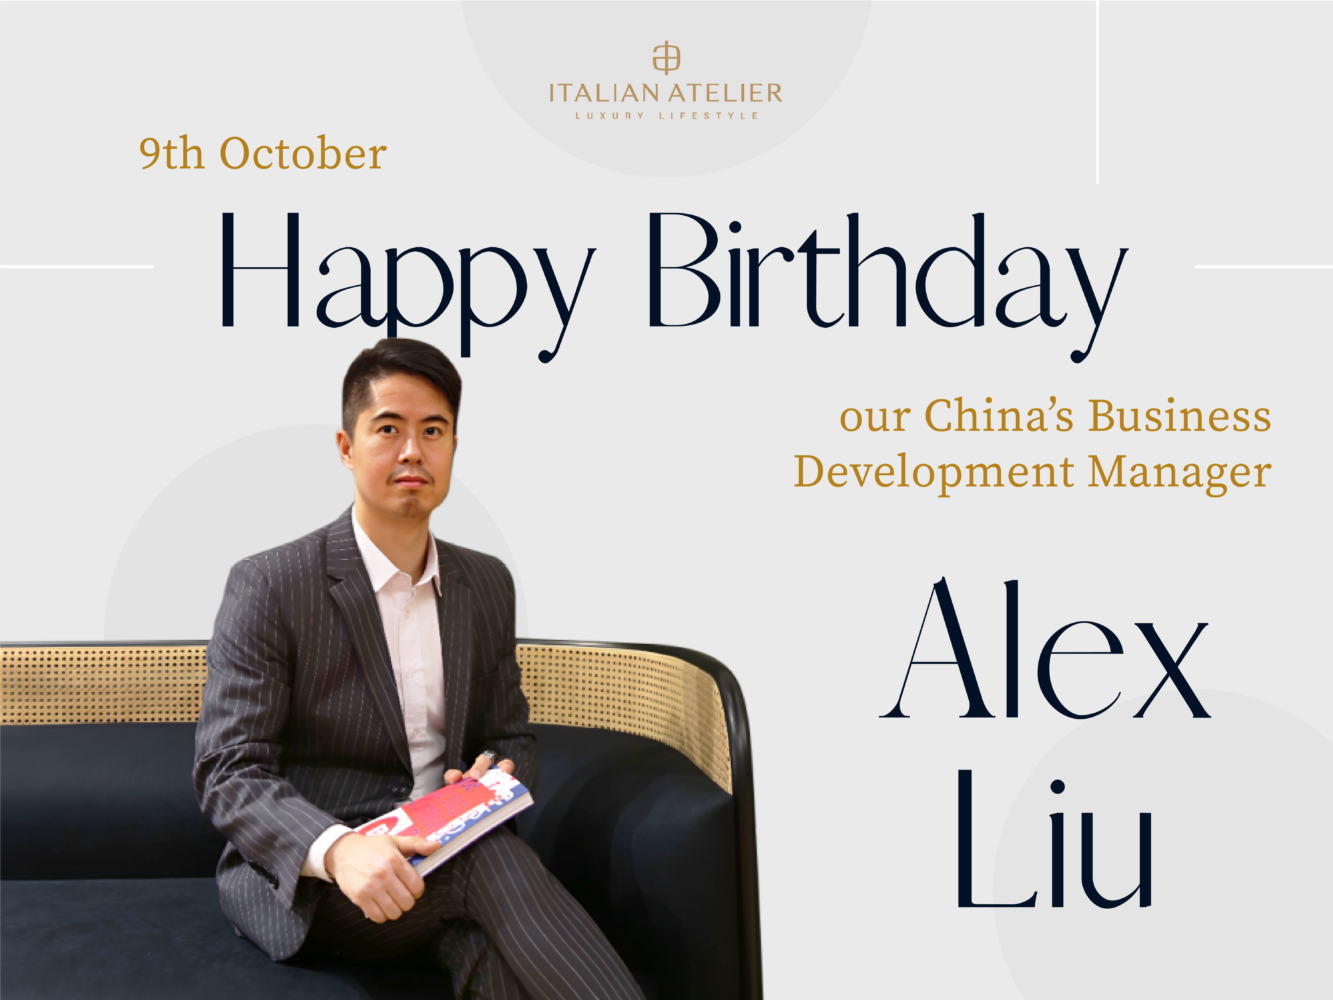 ALEX LIU: Life is like a box of chocolates. You never know what you’re gonna get!